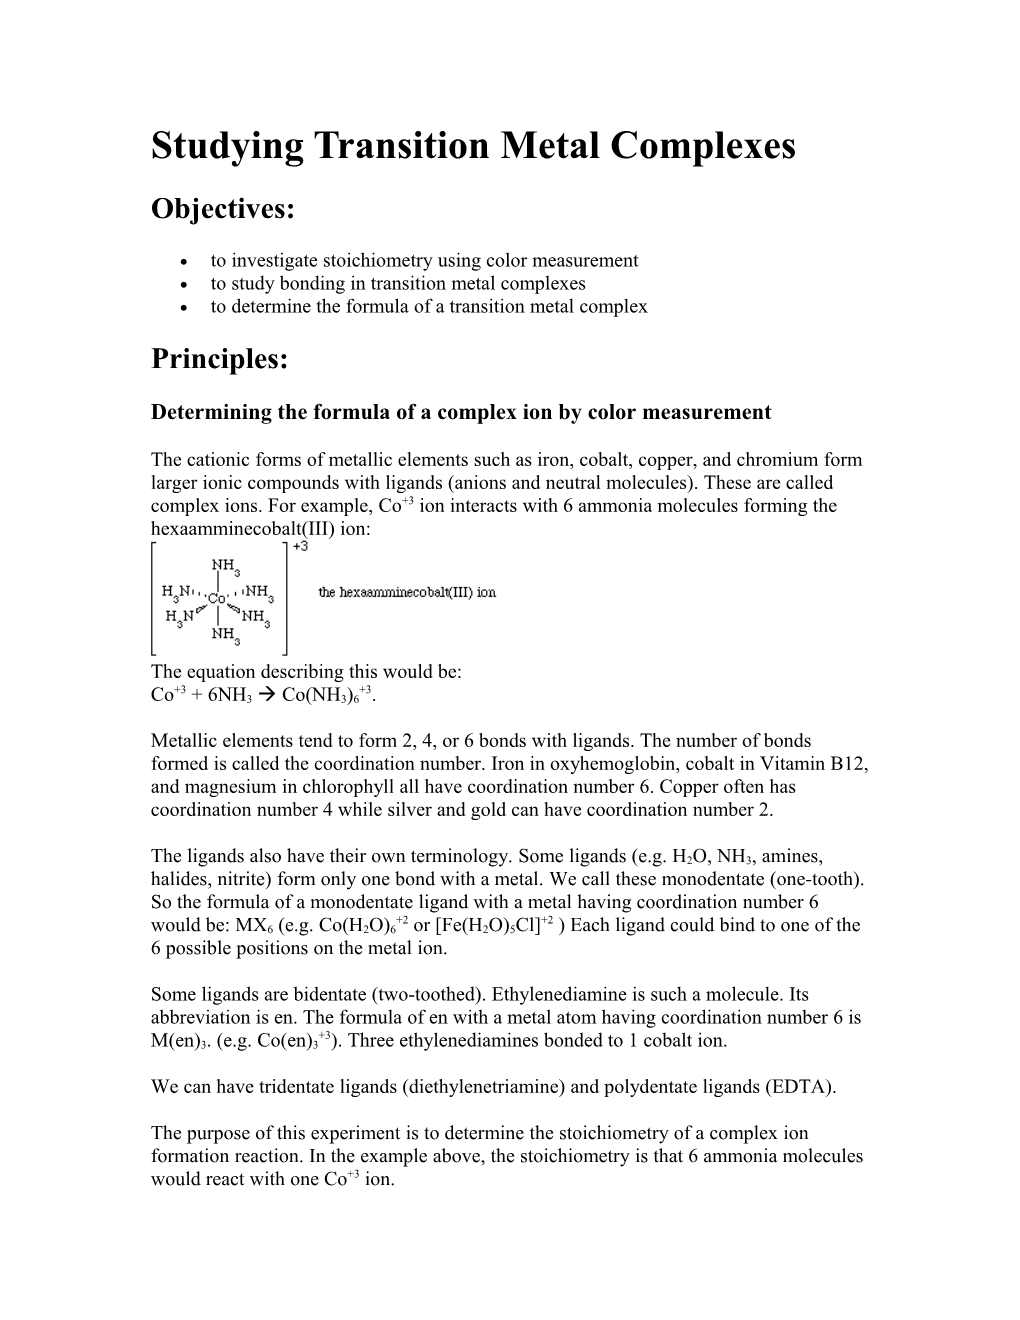 Studying Transition Metal Complexes